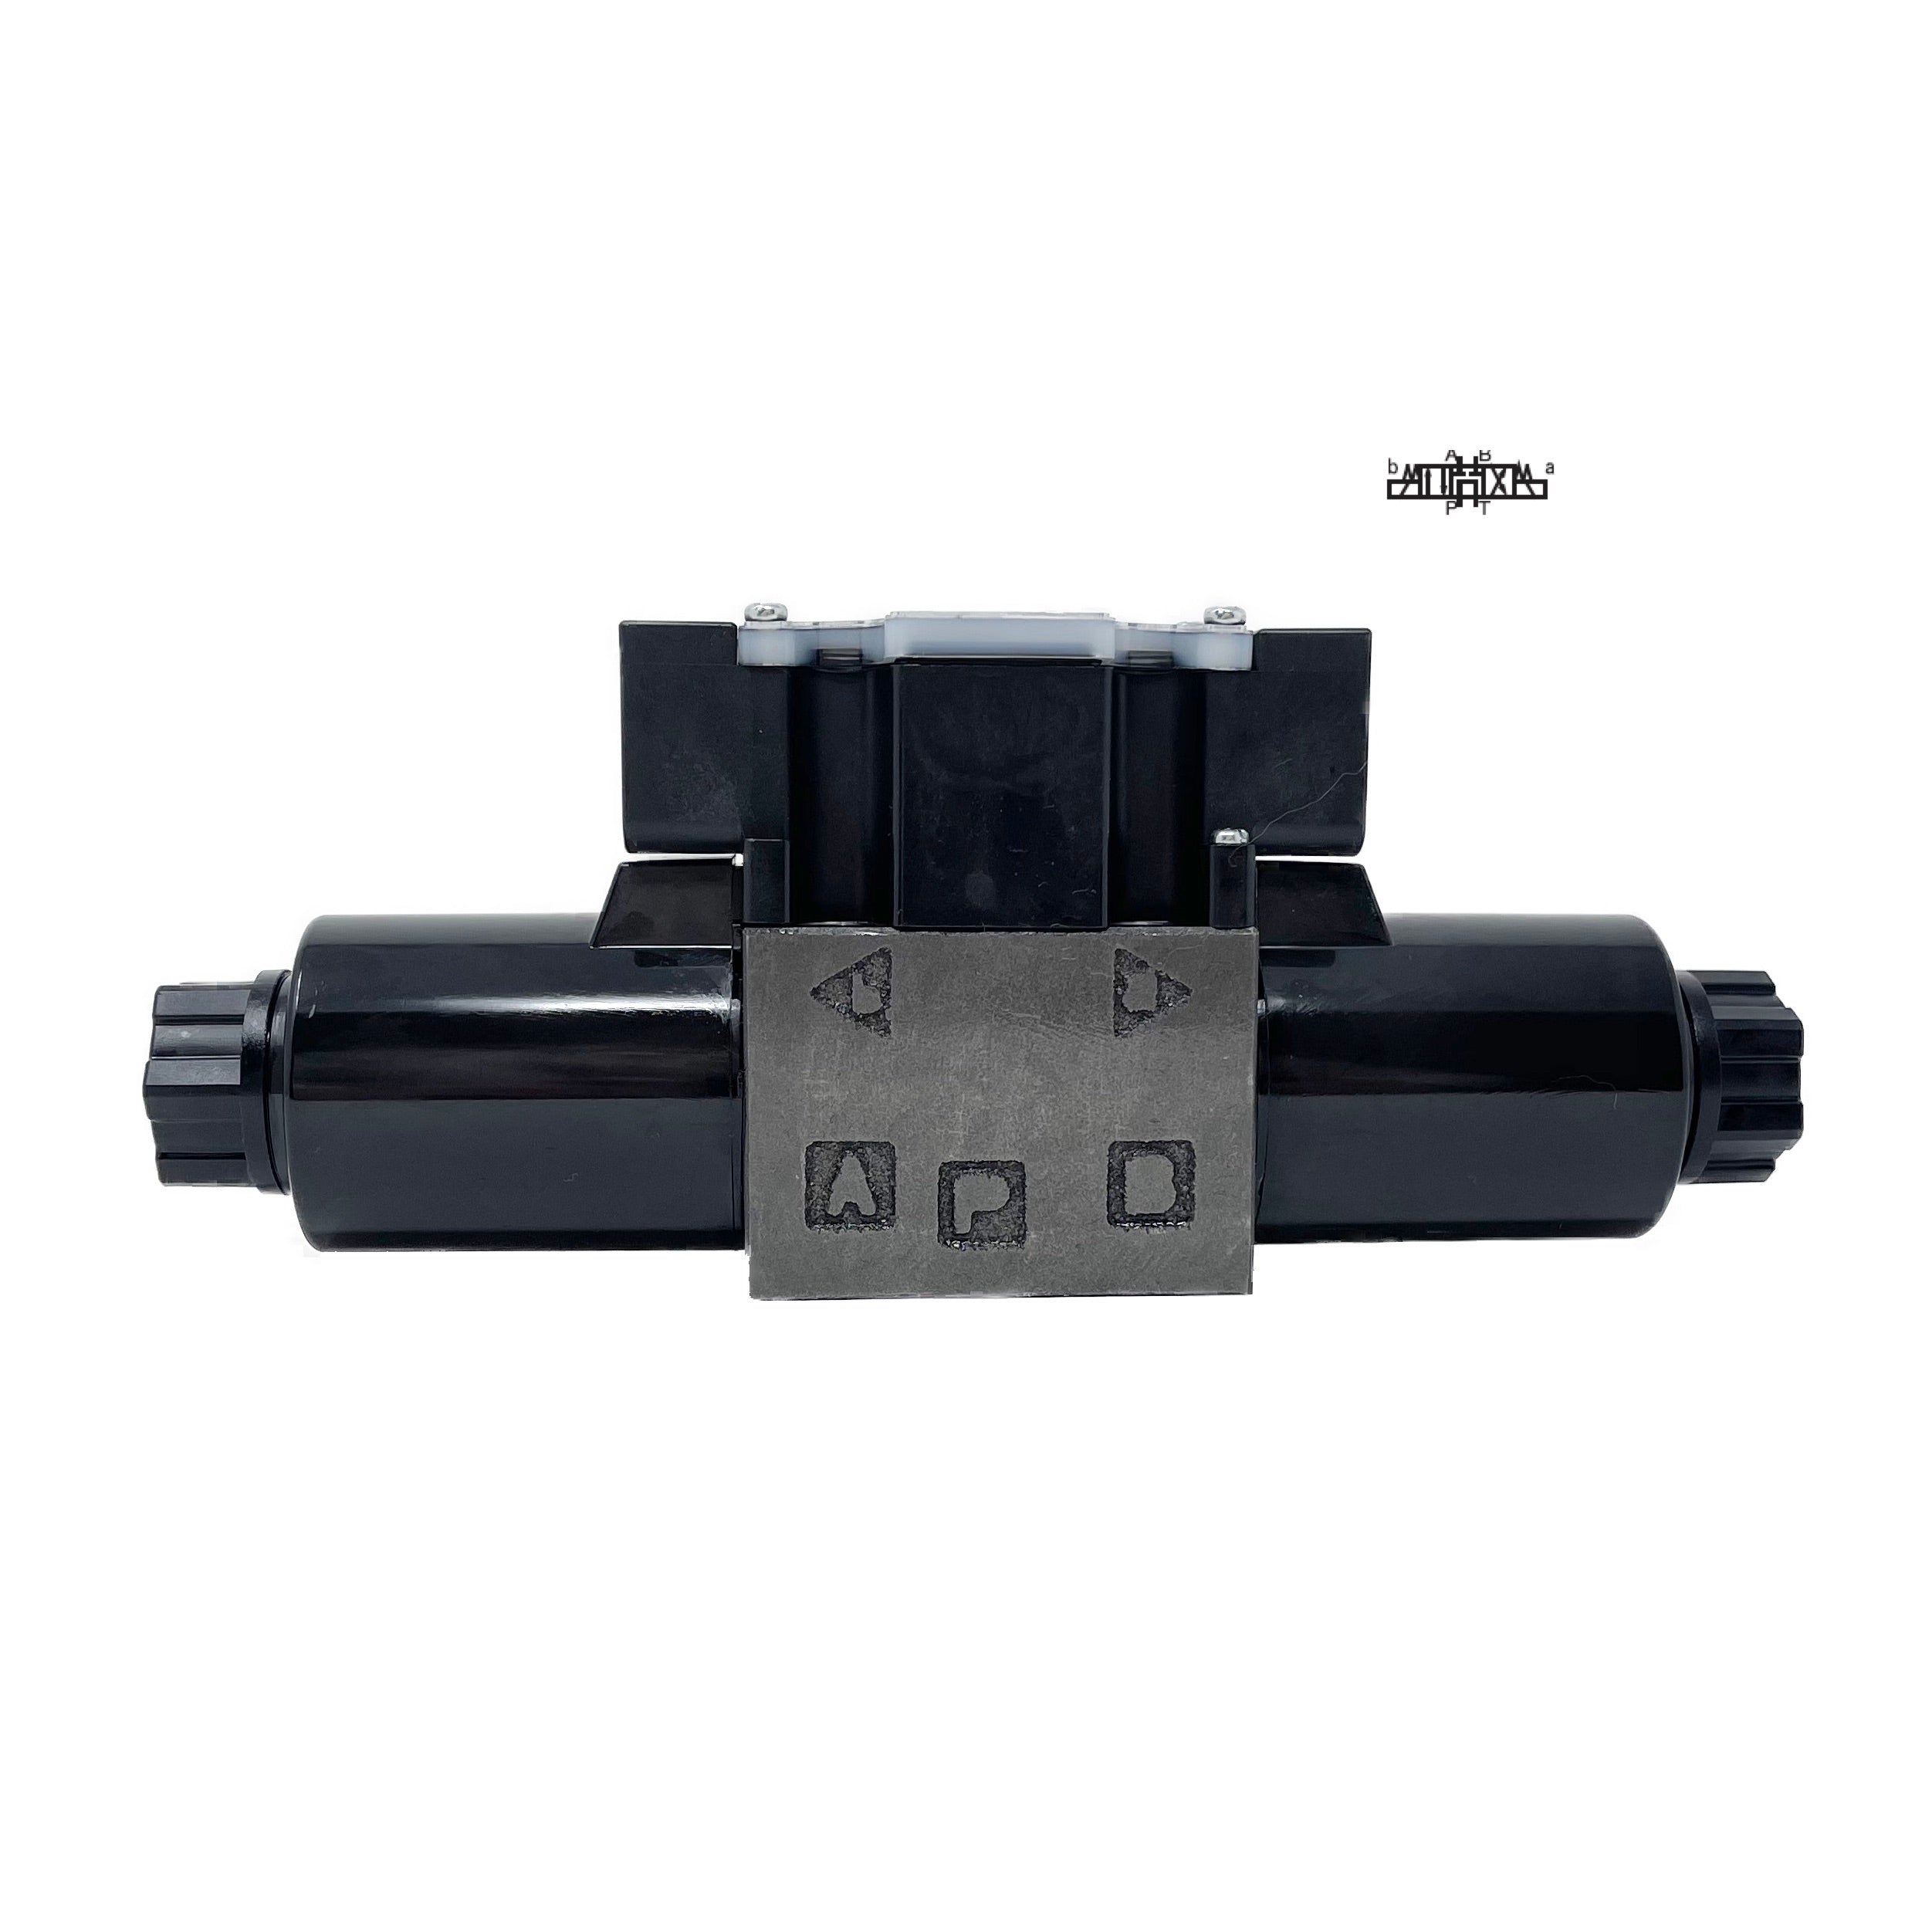 SS-G01-C7Y-FR-D1-E31 : Nachi Solenoid Valve, 3P4W, D03 (NG6), 13.2GPM, 5075psi, P to T with A & B Blocked in Neutral, 12 VDC, Wiring Box with Lights, Shockless Type